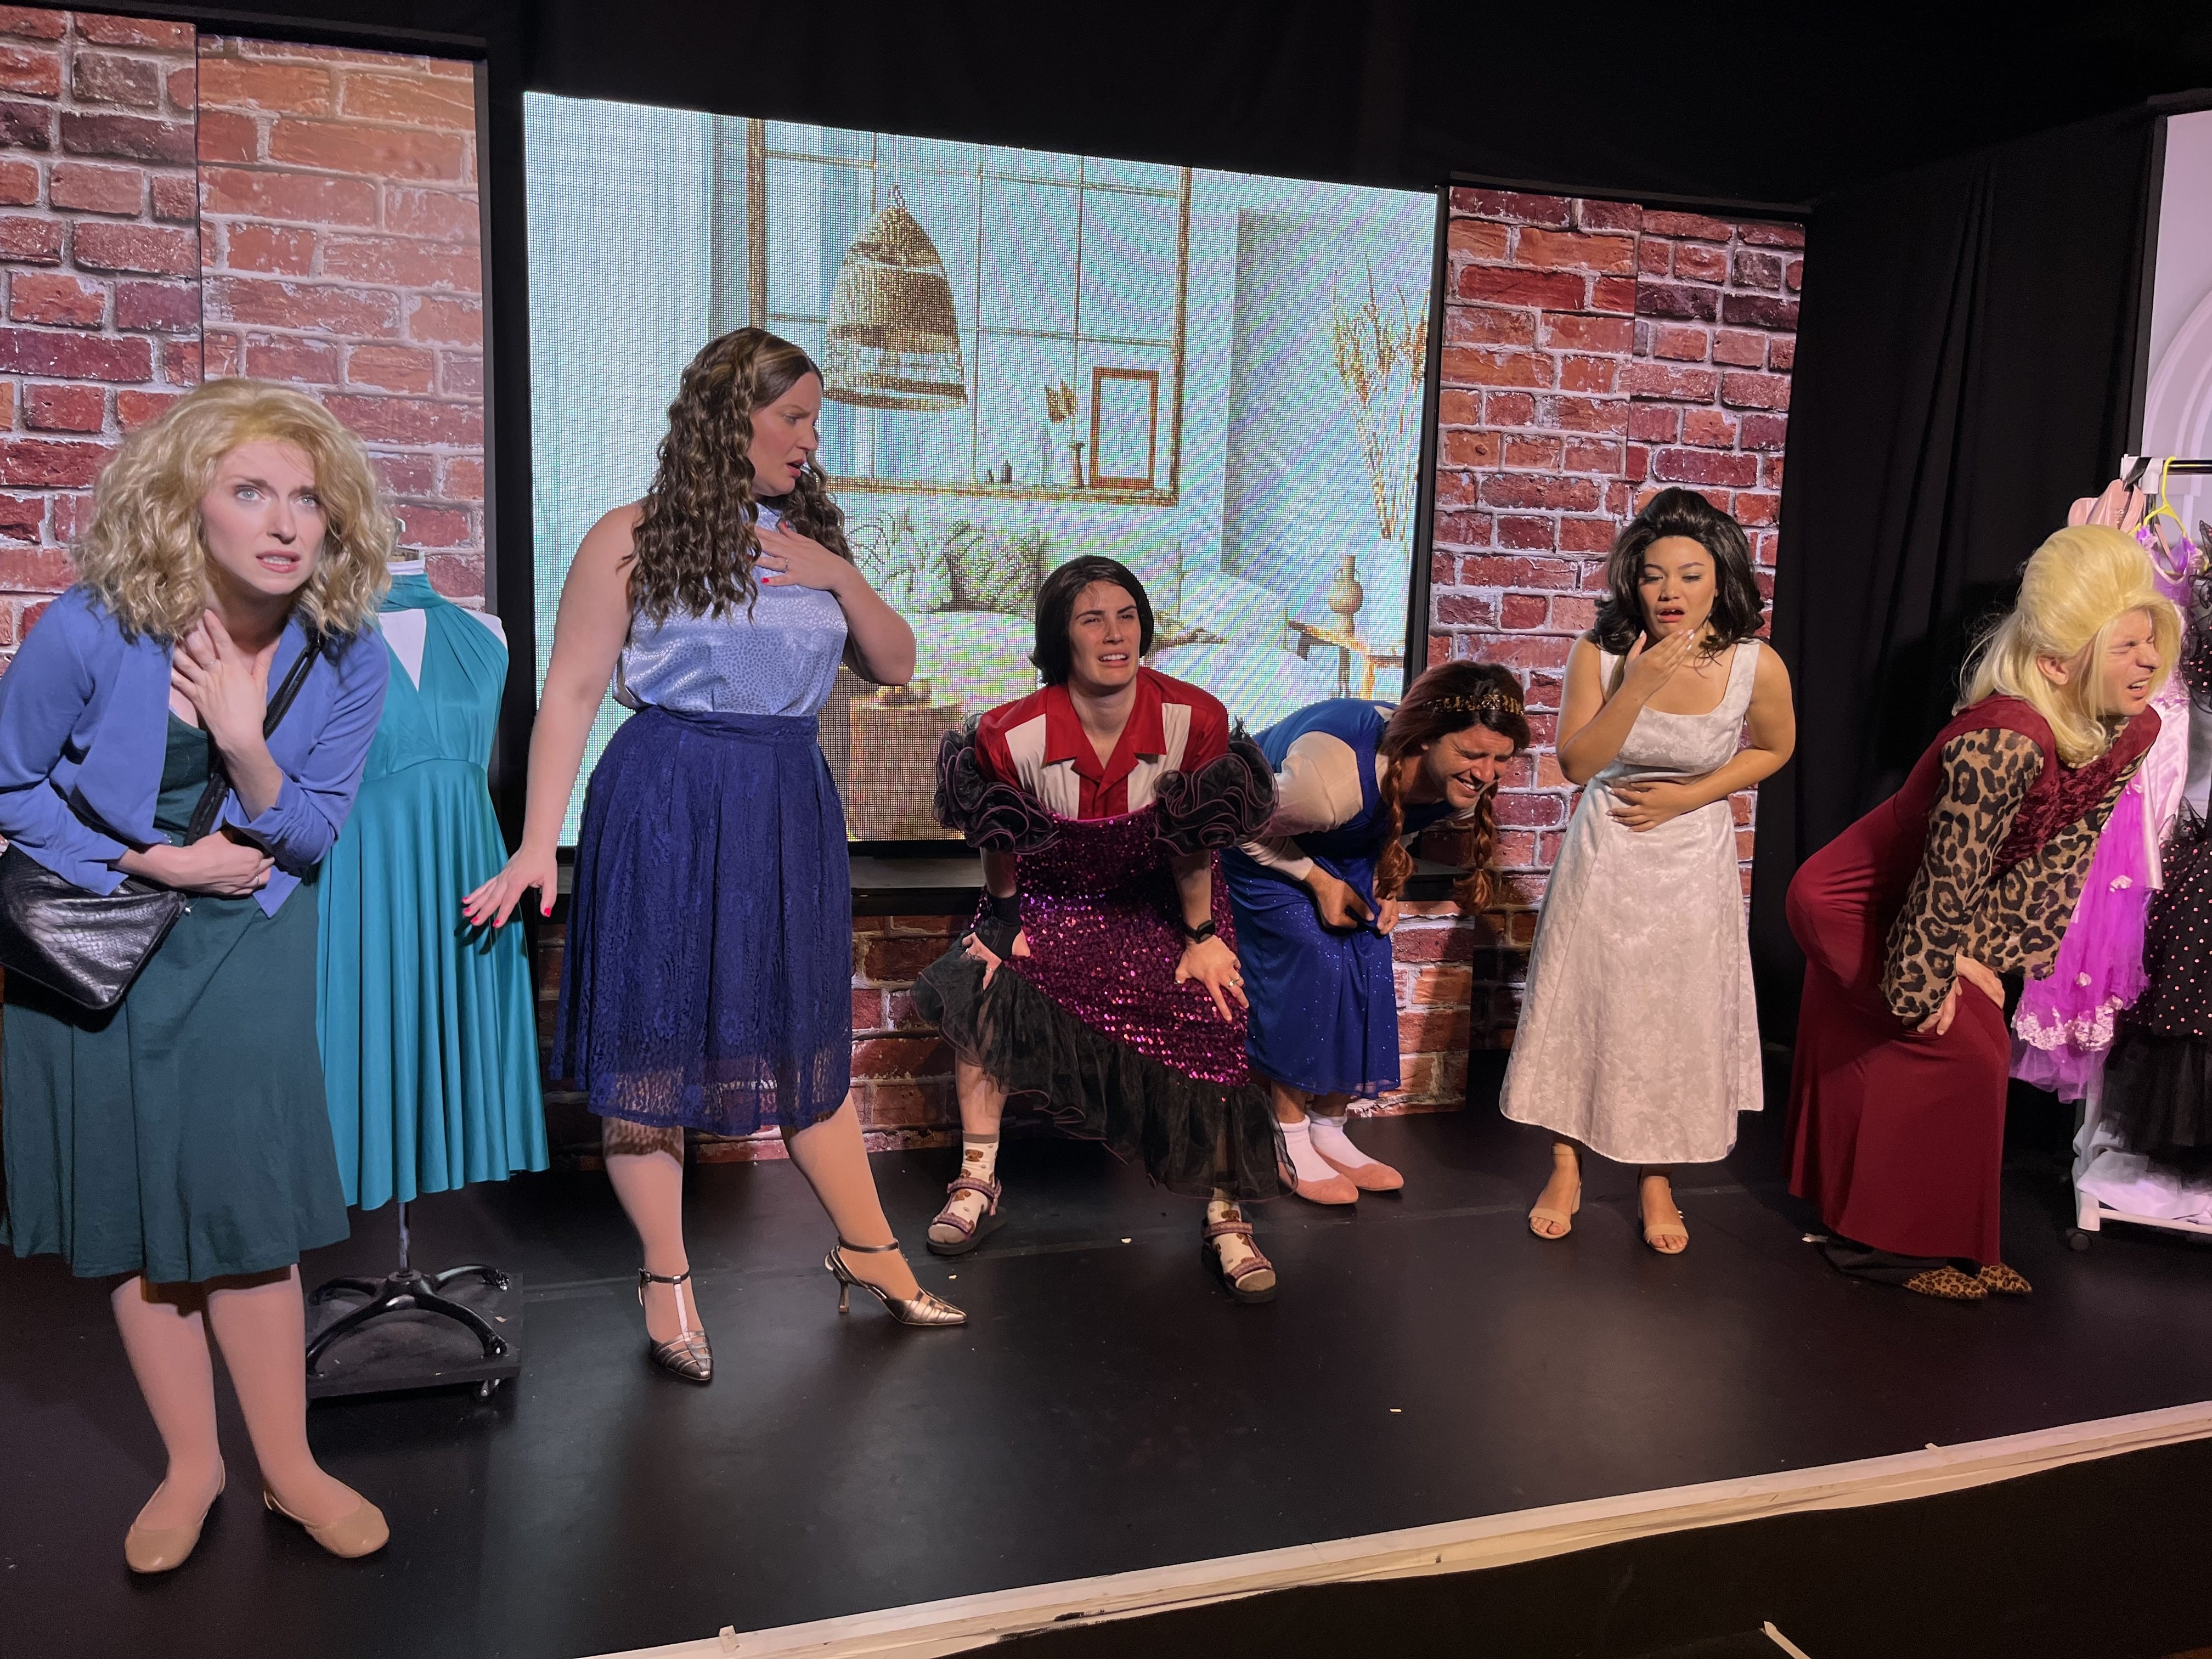 comedy musical bridesmaids at orleans casino